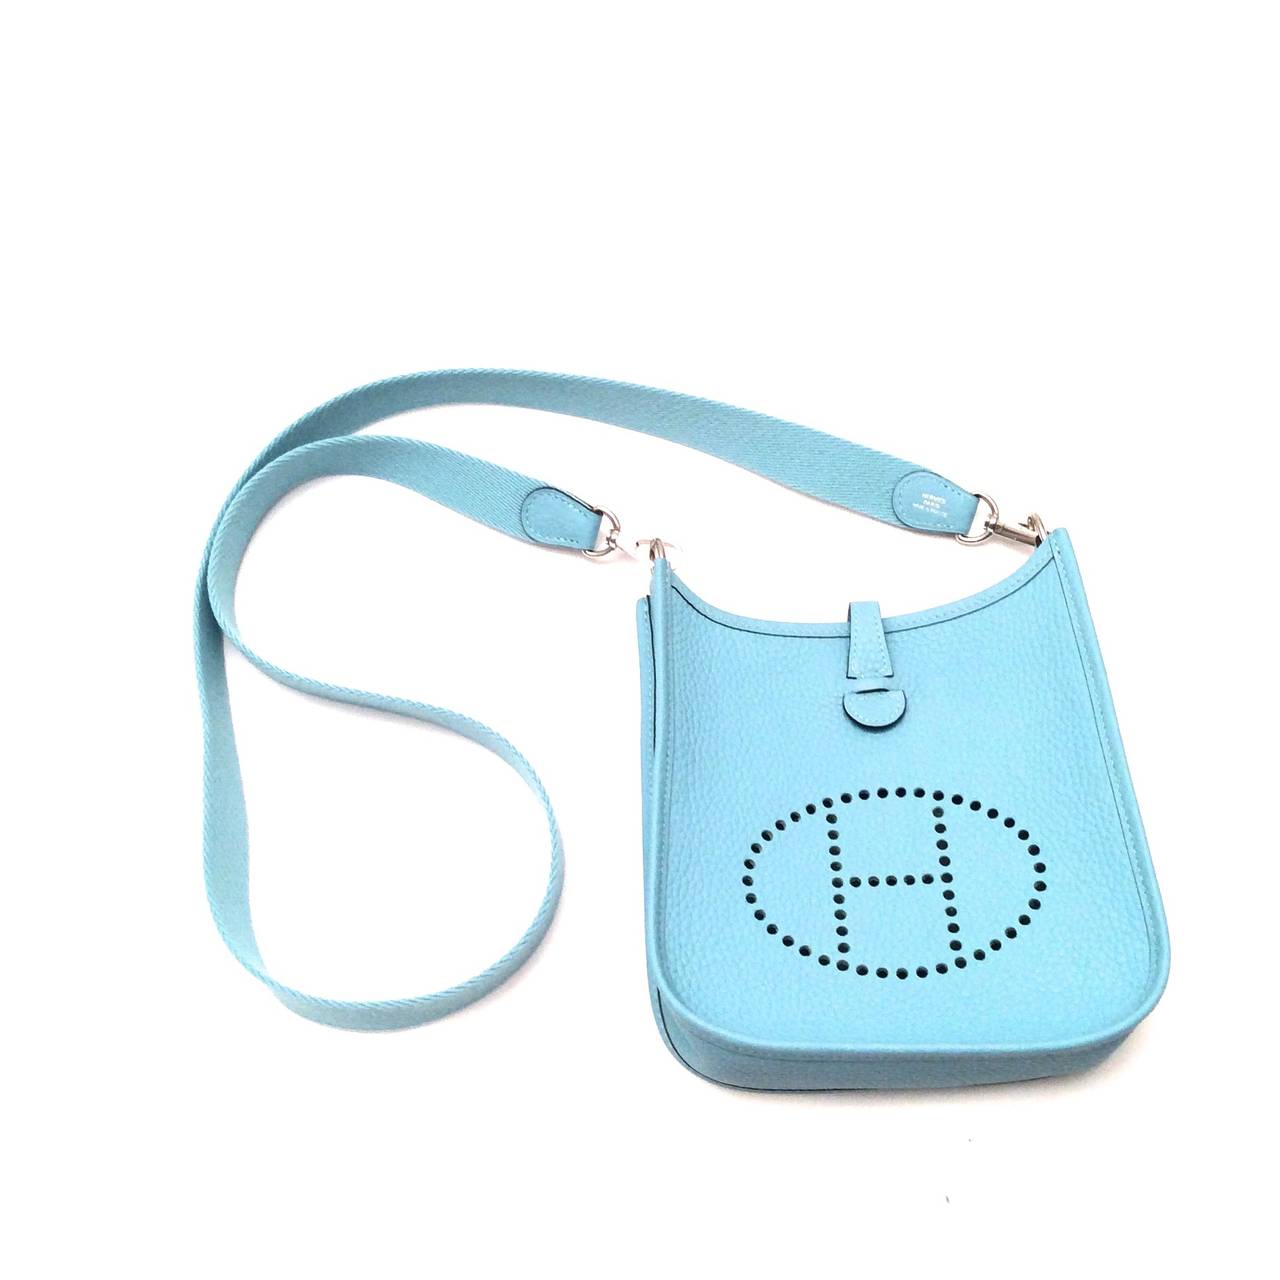 New mini Evelyne / Evelyn in original box. Gorgeous mini Evelyne in atoll bleu / blue. Great cross body bag that is perfect for all basic necessities. The leather on the bag is Clemence. There is a snap on the back of the handbag for opening and